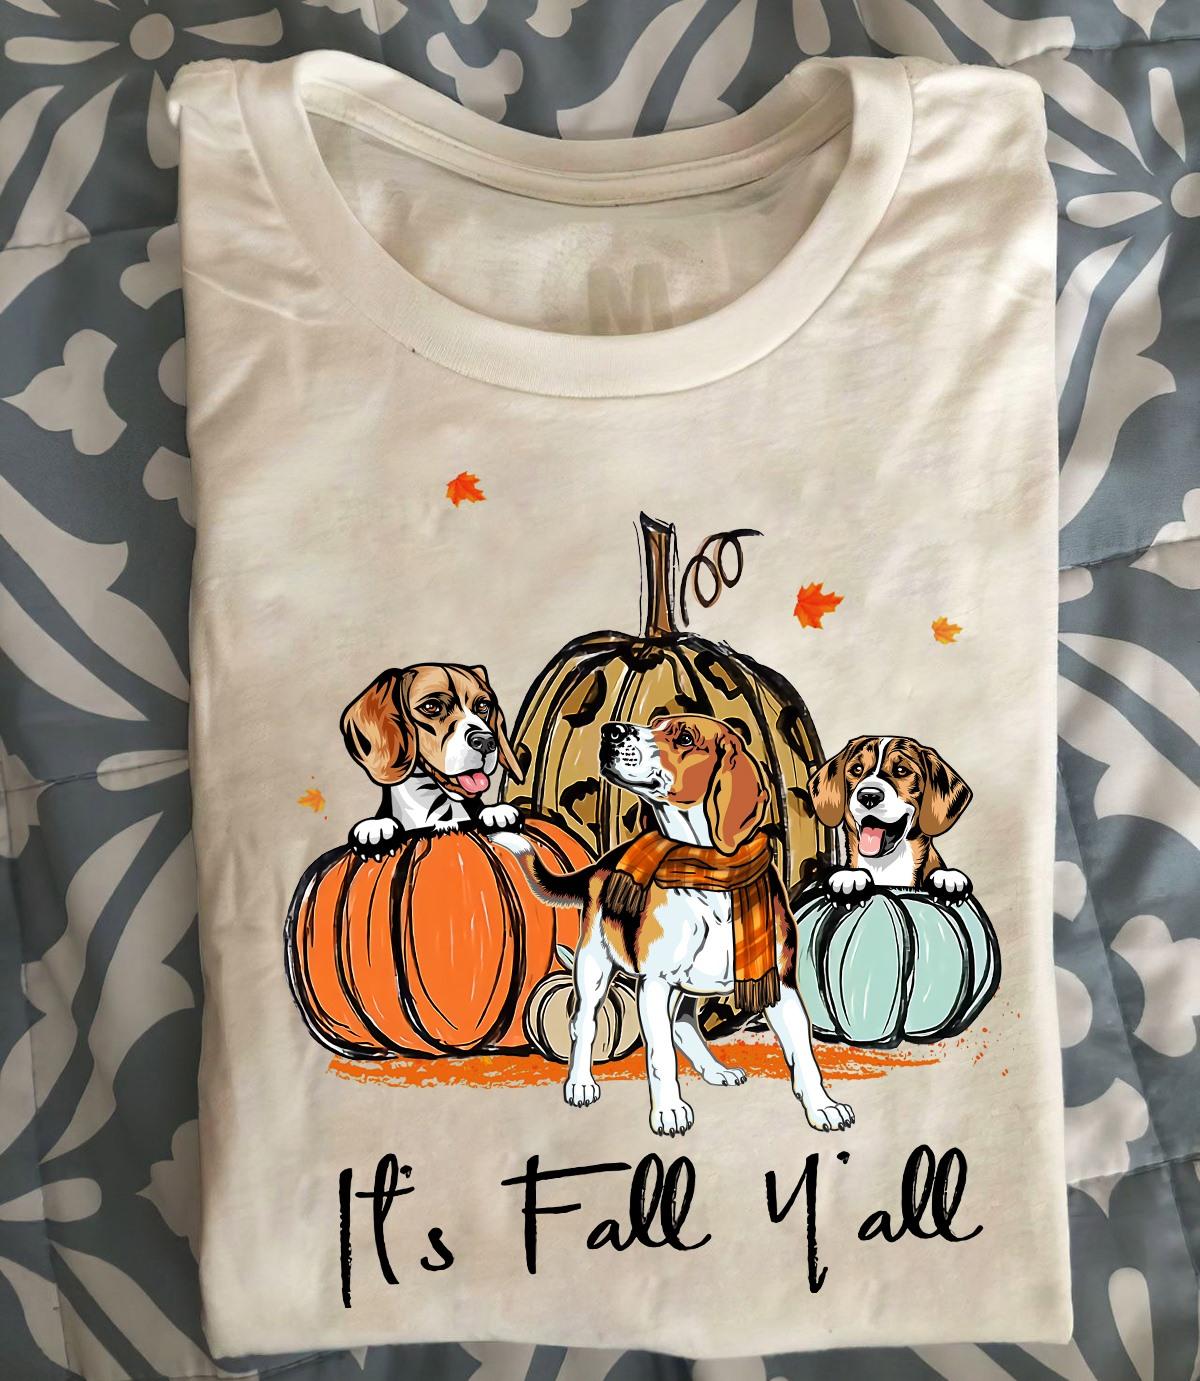 It's fall y'all - Beagle dog and pumpkins, Thanksgiving day gift